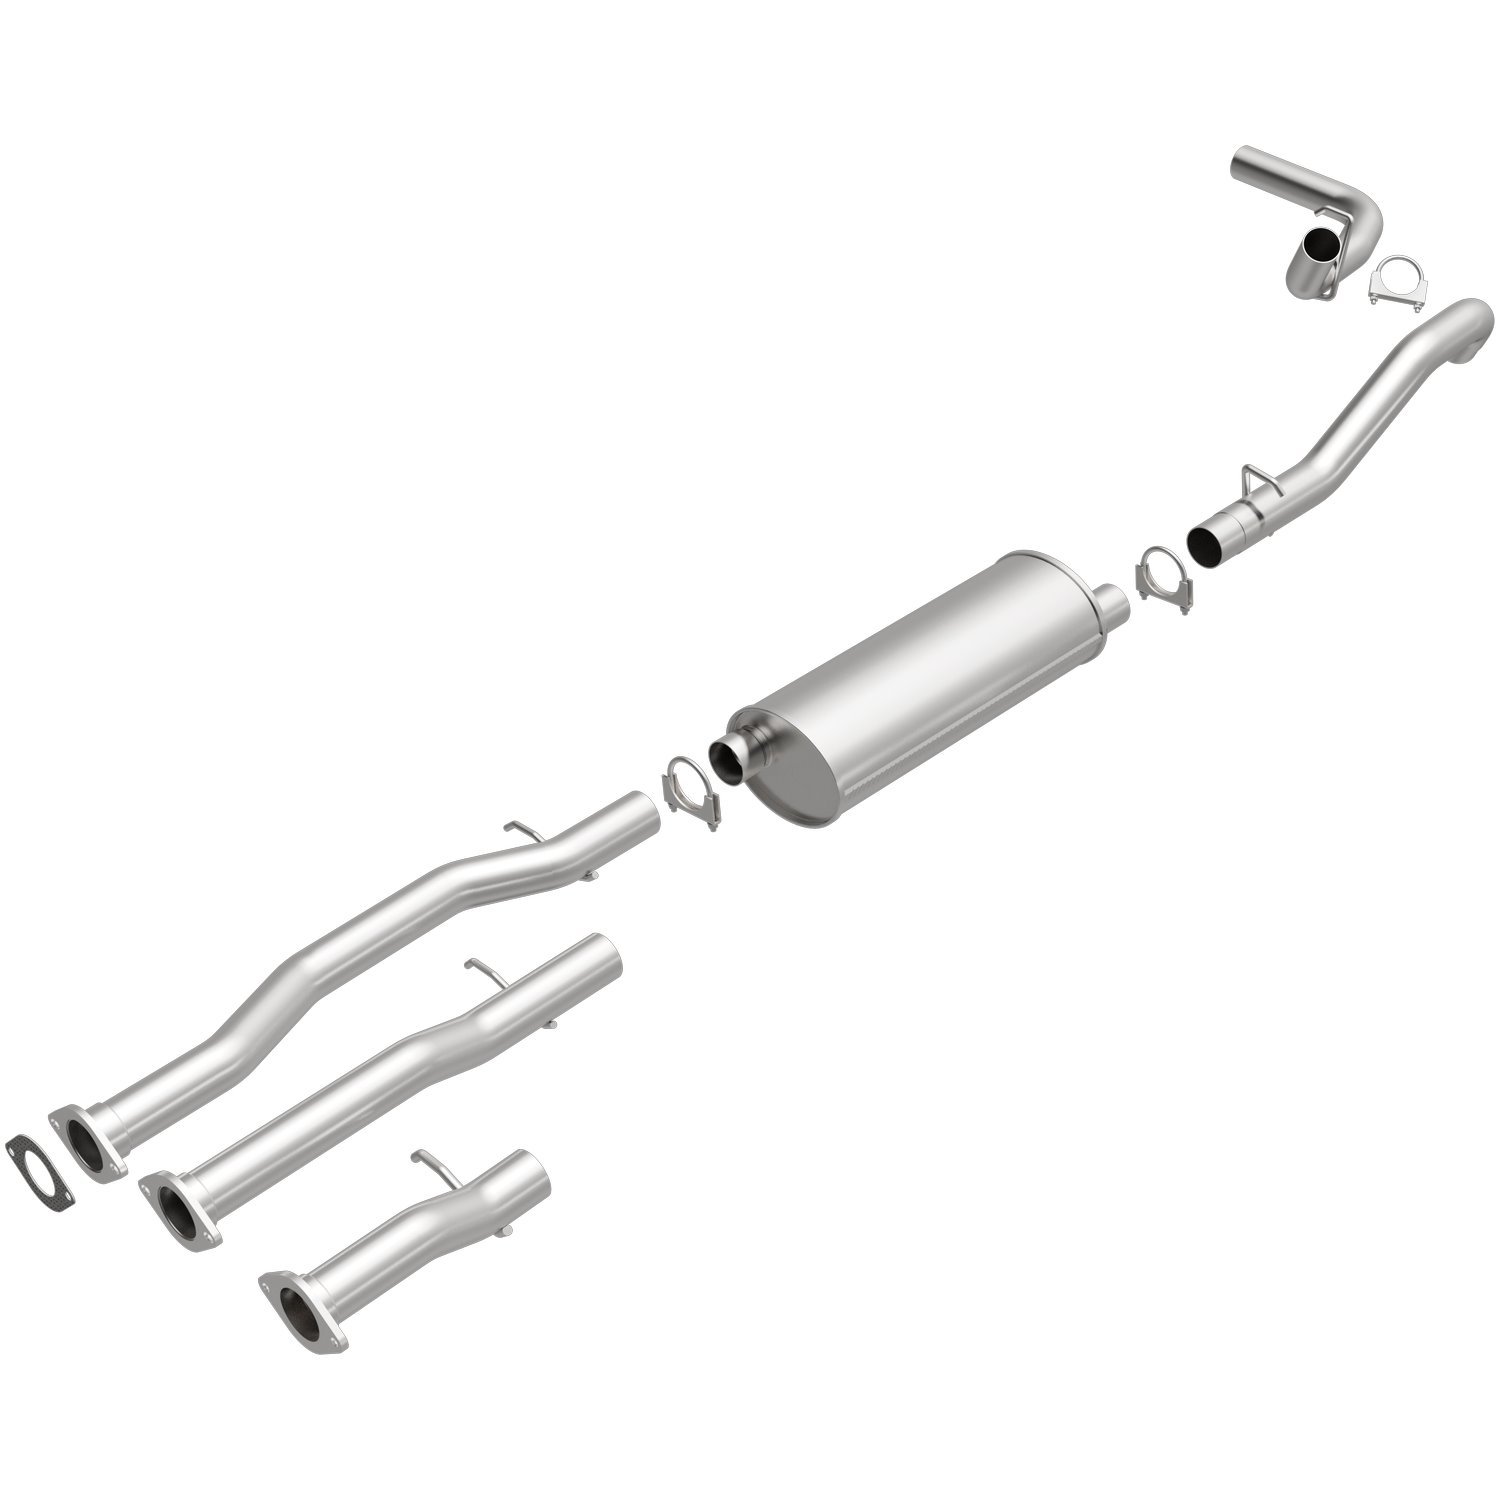 Direct-Fit Exhaust Kit, 1996-1998 Chevy C1500/K1500/C2500/K2500